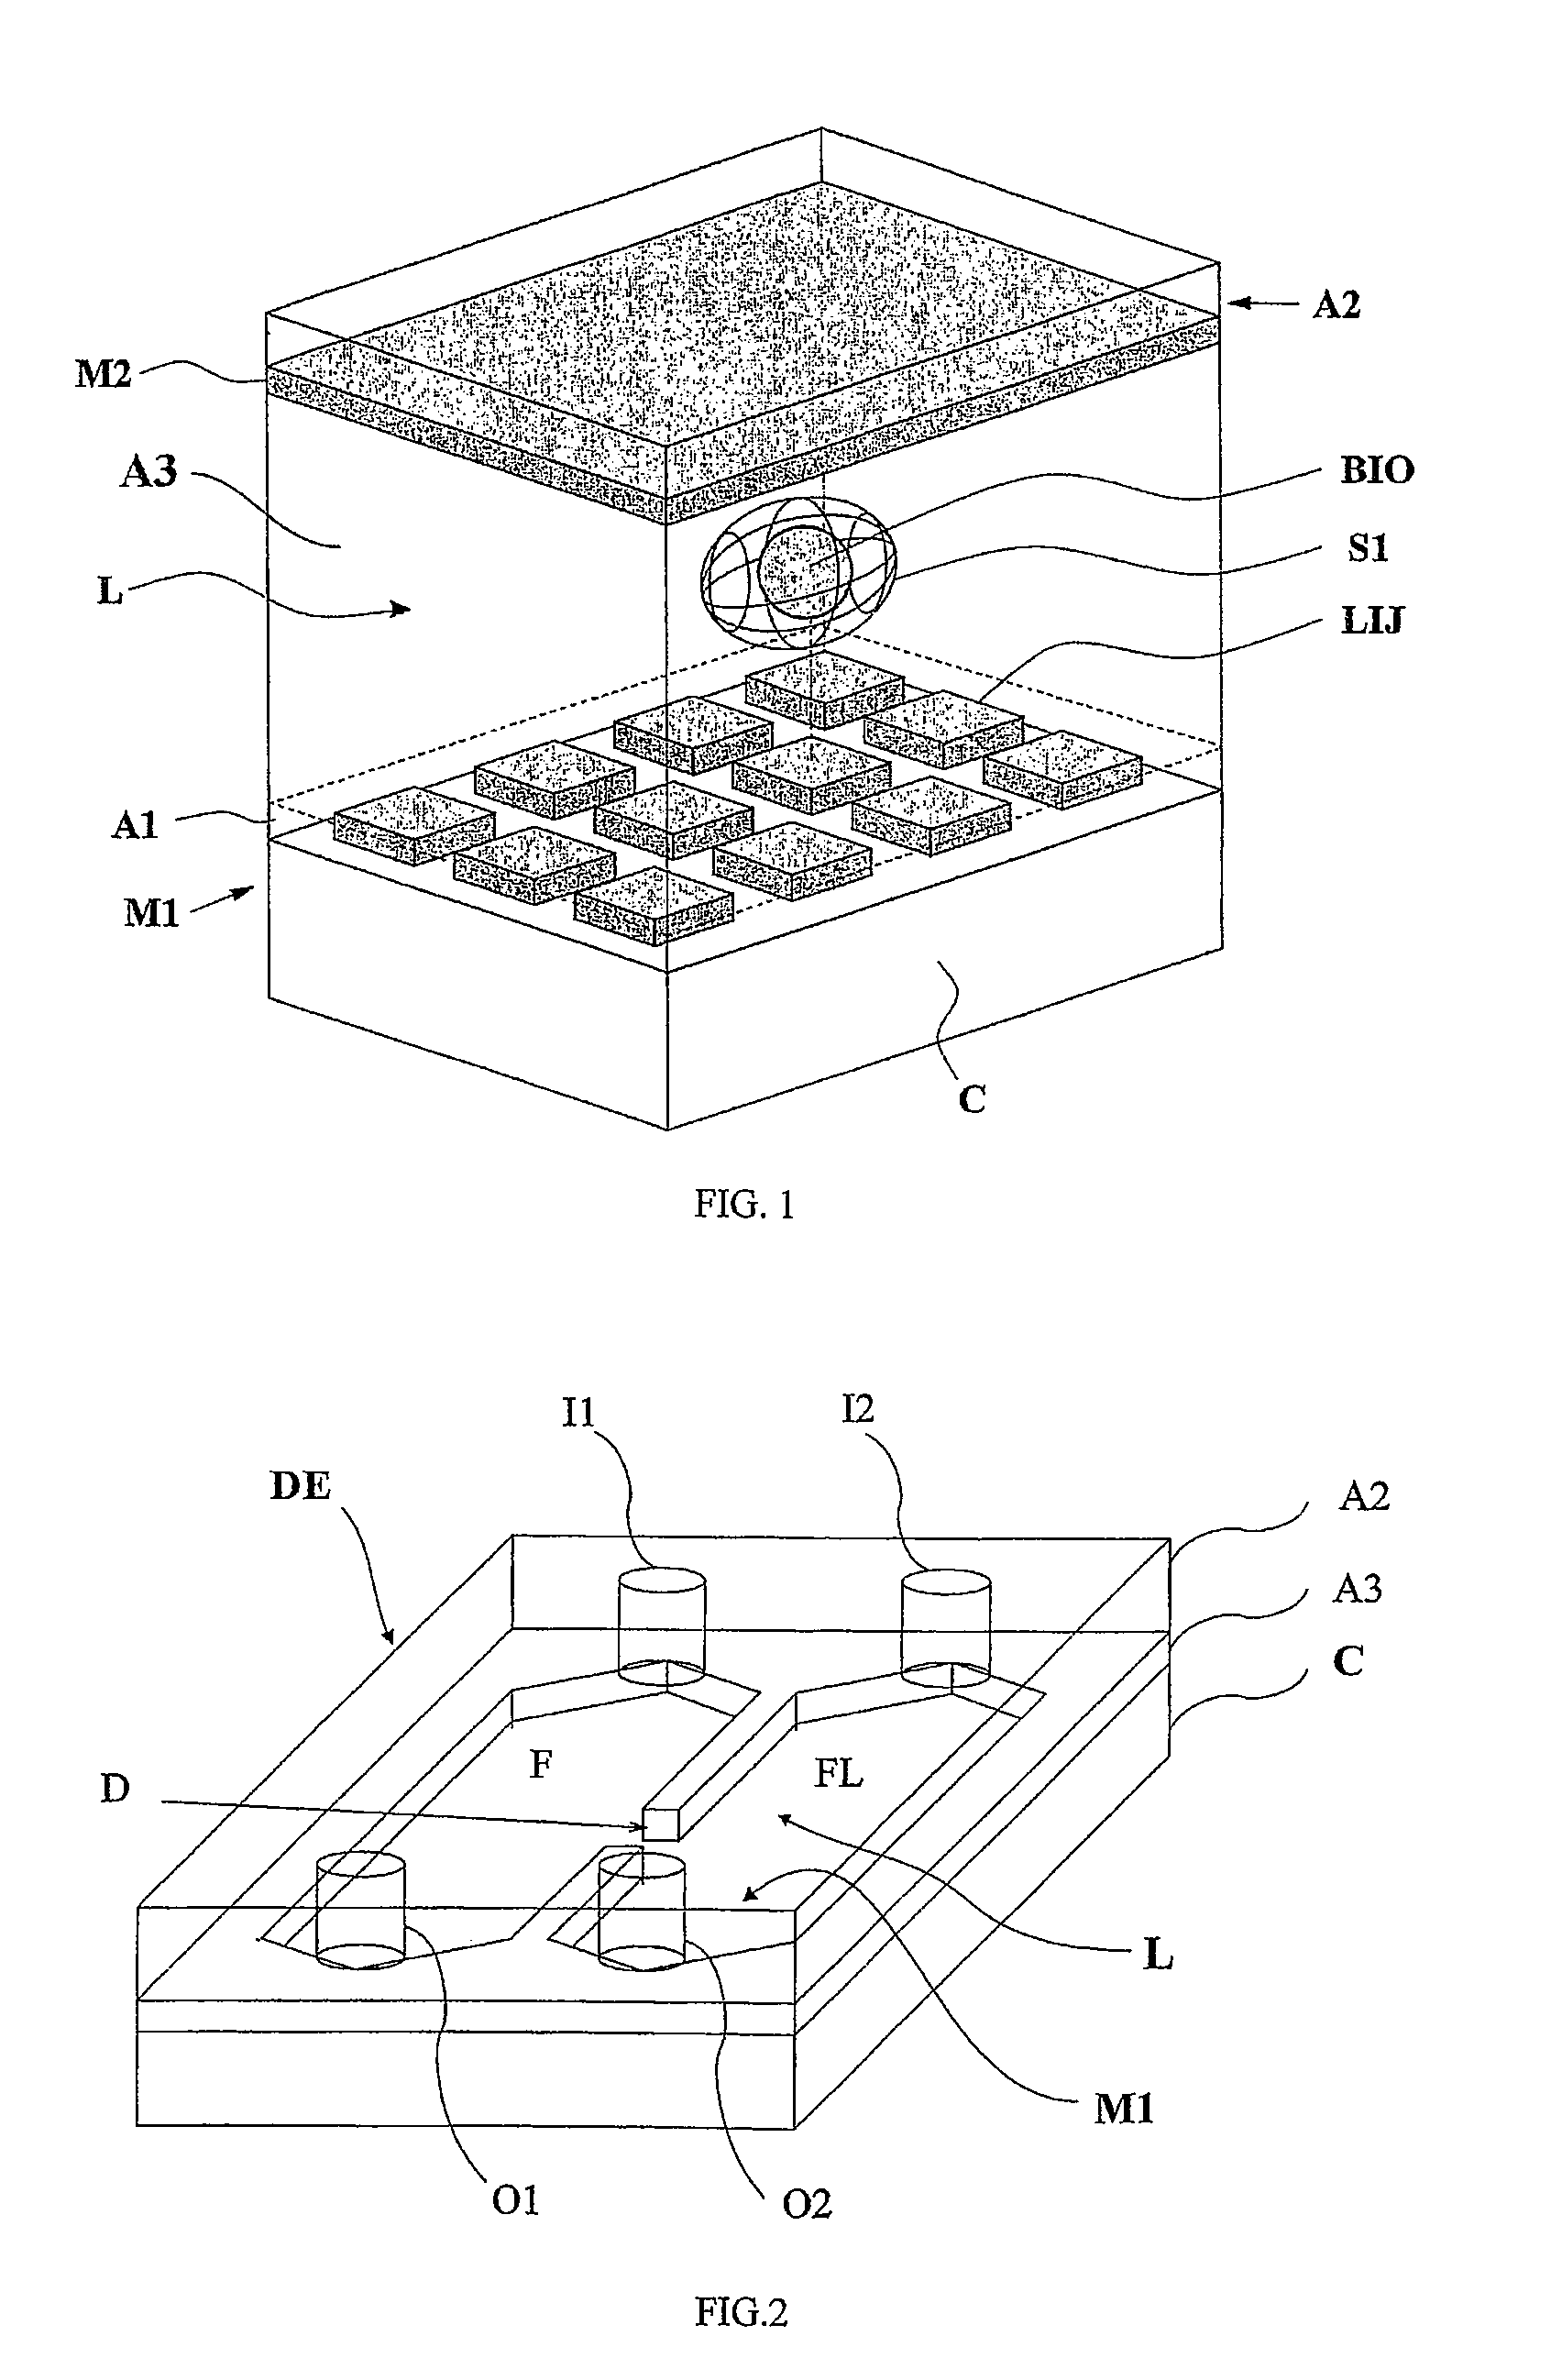 Method and apparatus for high-throughput biological-activity screening of cells and/or compounds